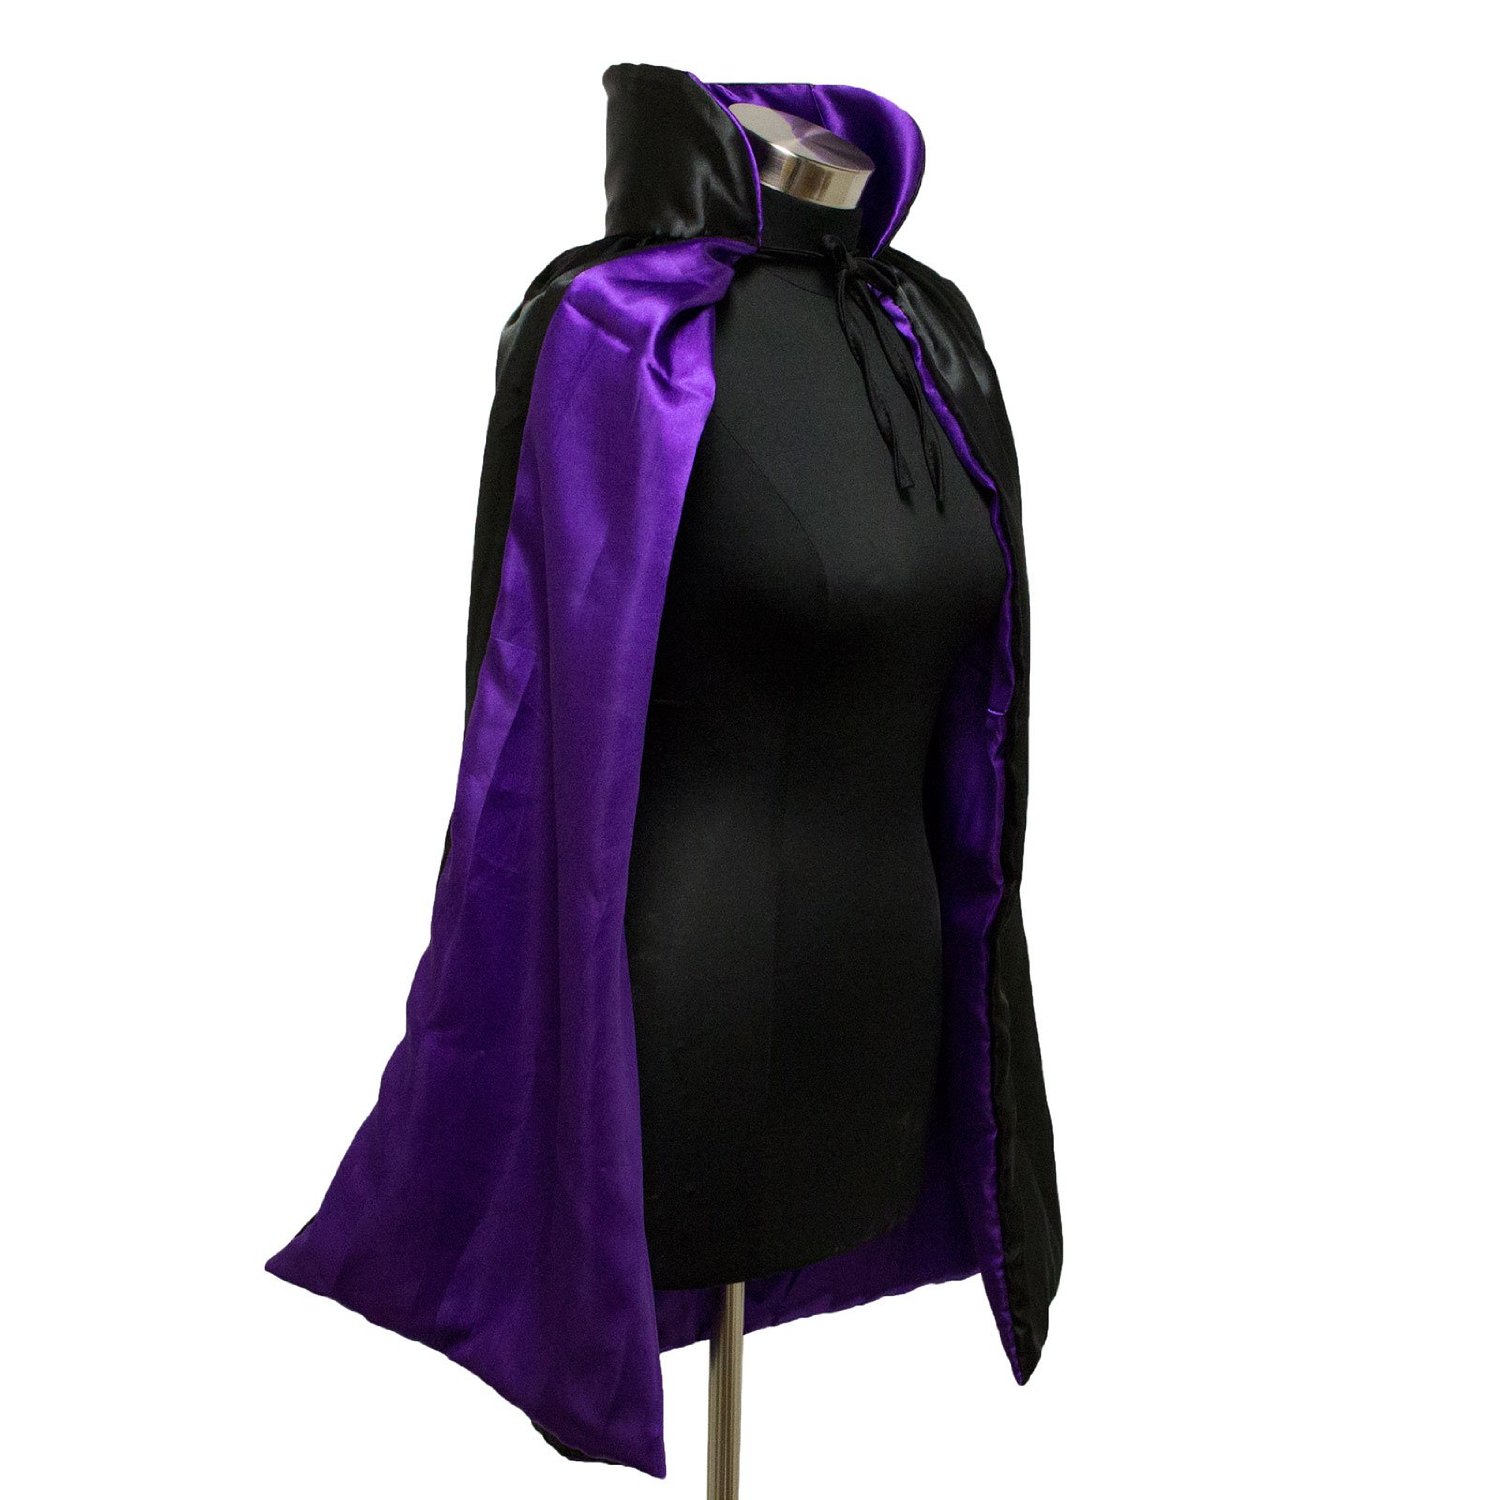 Witch cape